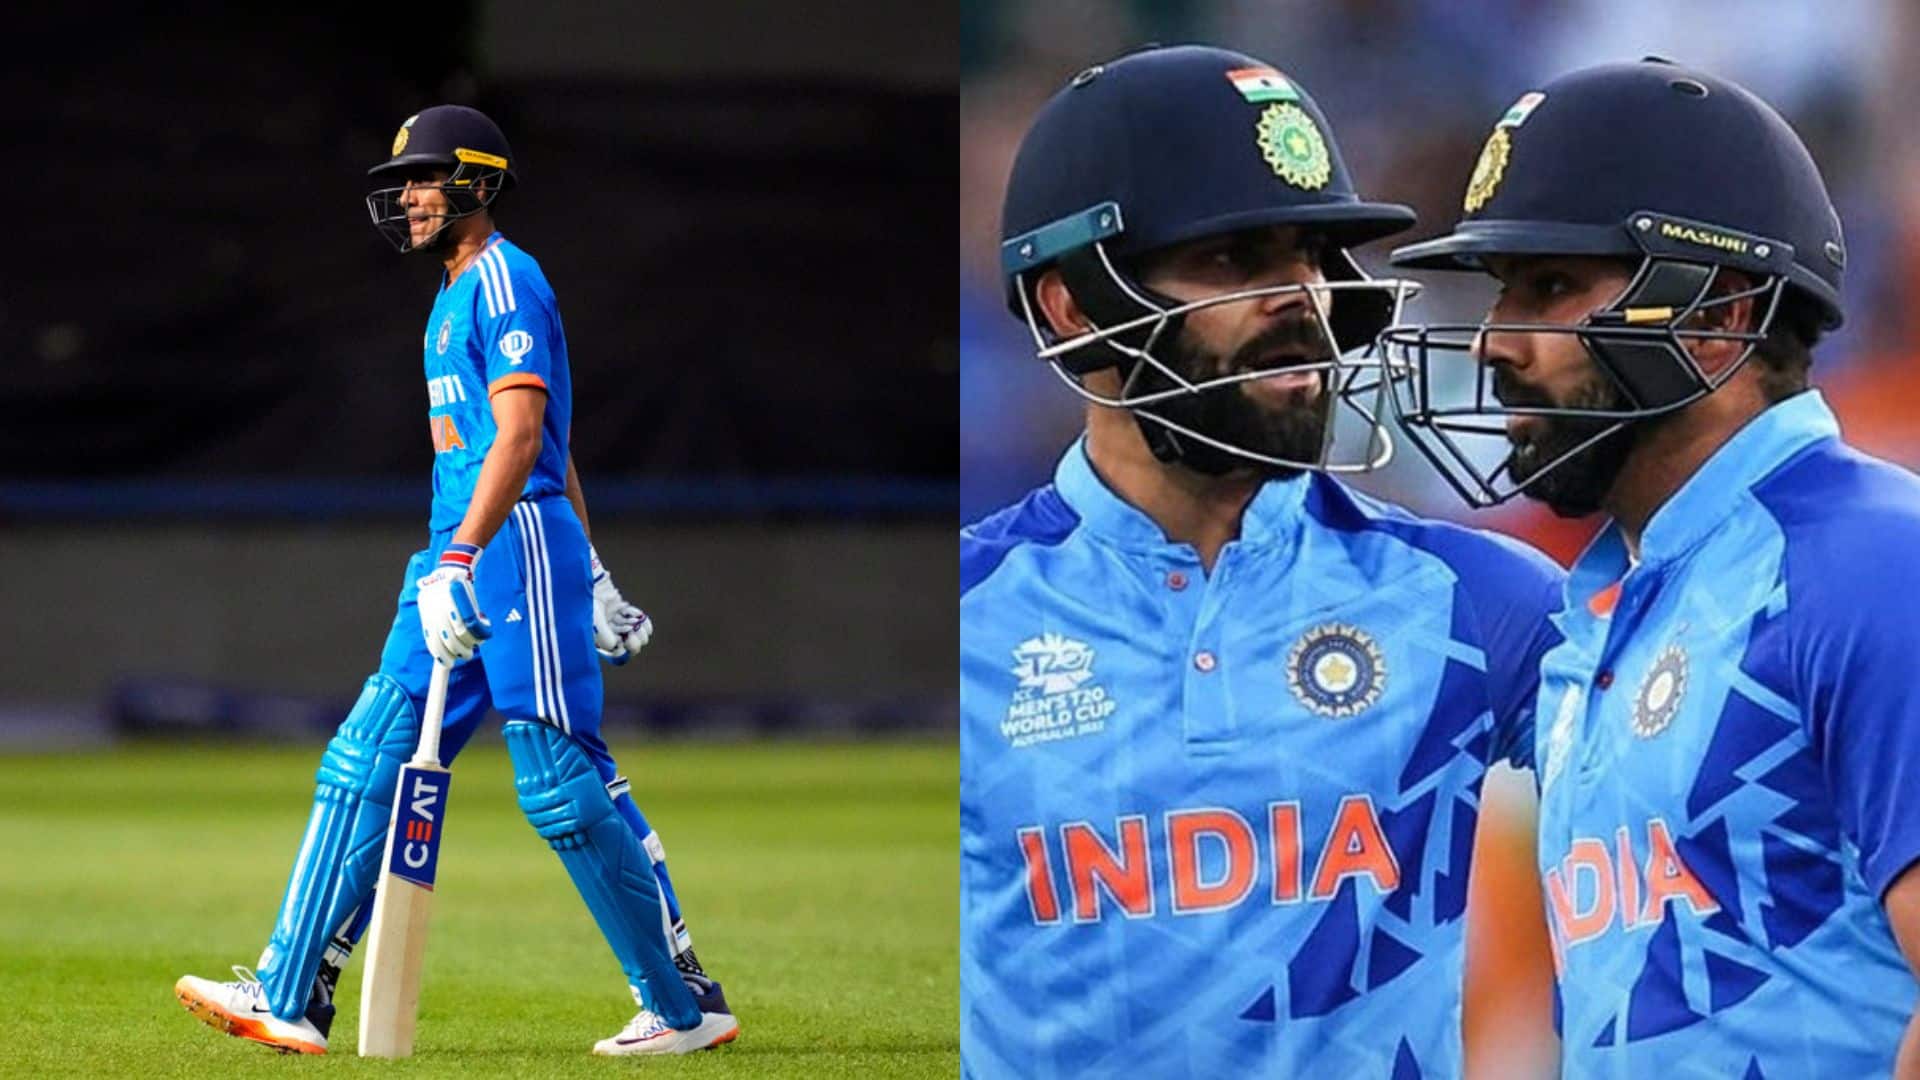 Shubman Gill Dropped, Rohit & Kohli In; Here's India's Probable Playing XI For 1st T20I vs AFG